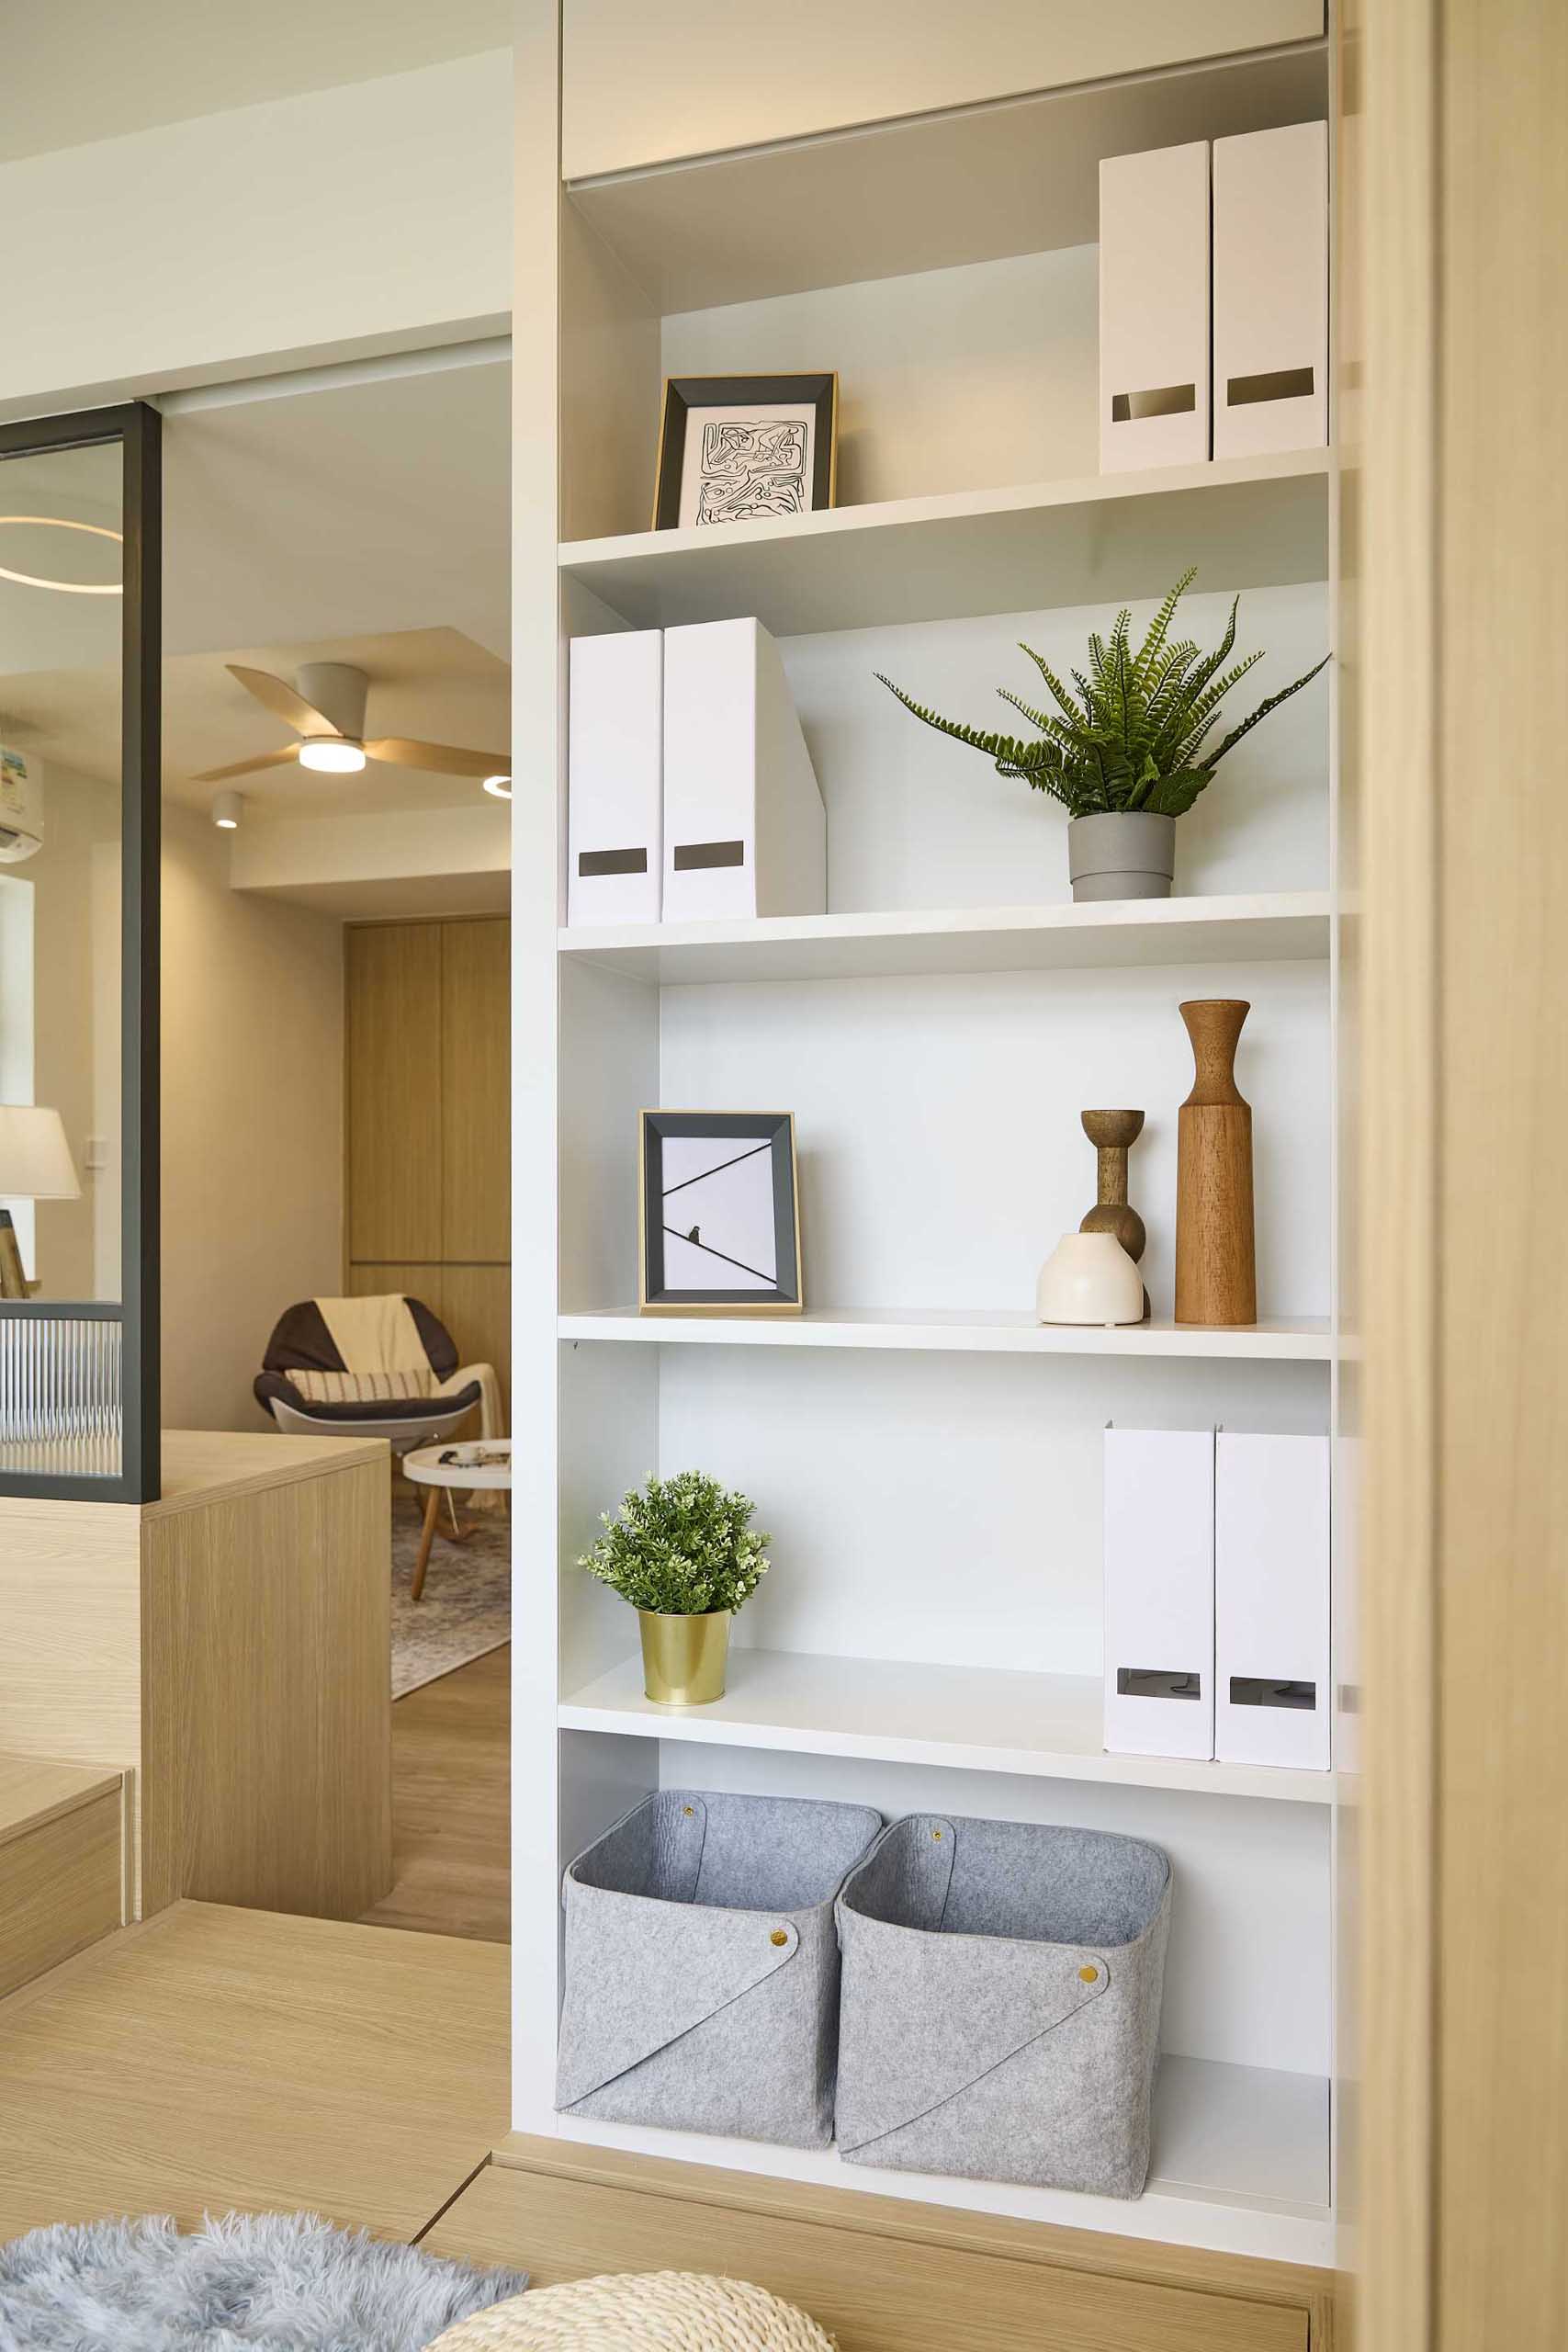 A wood closet and white bookshelf in a small apartment makes the most of the available space.